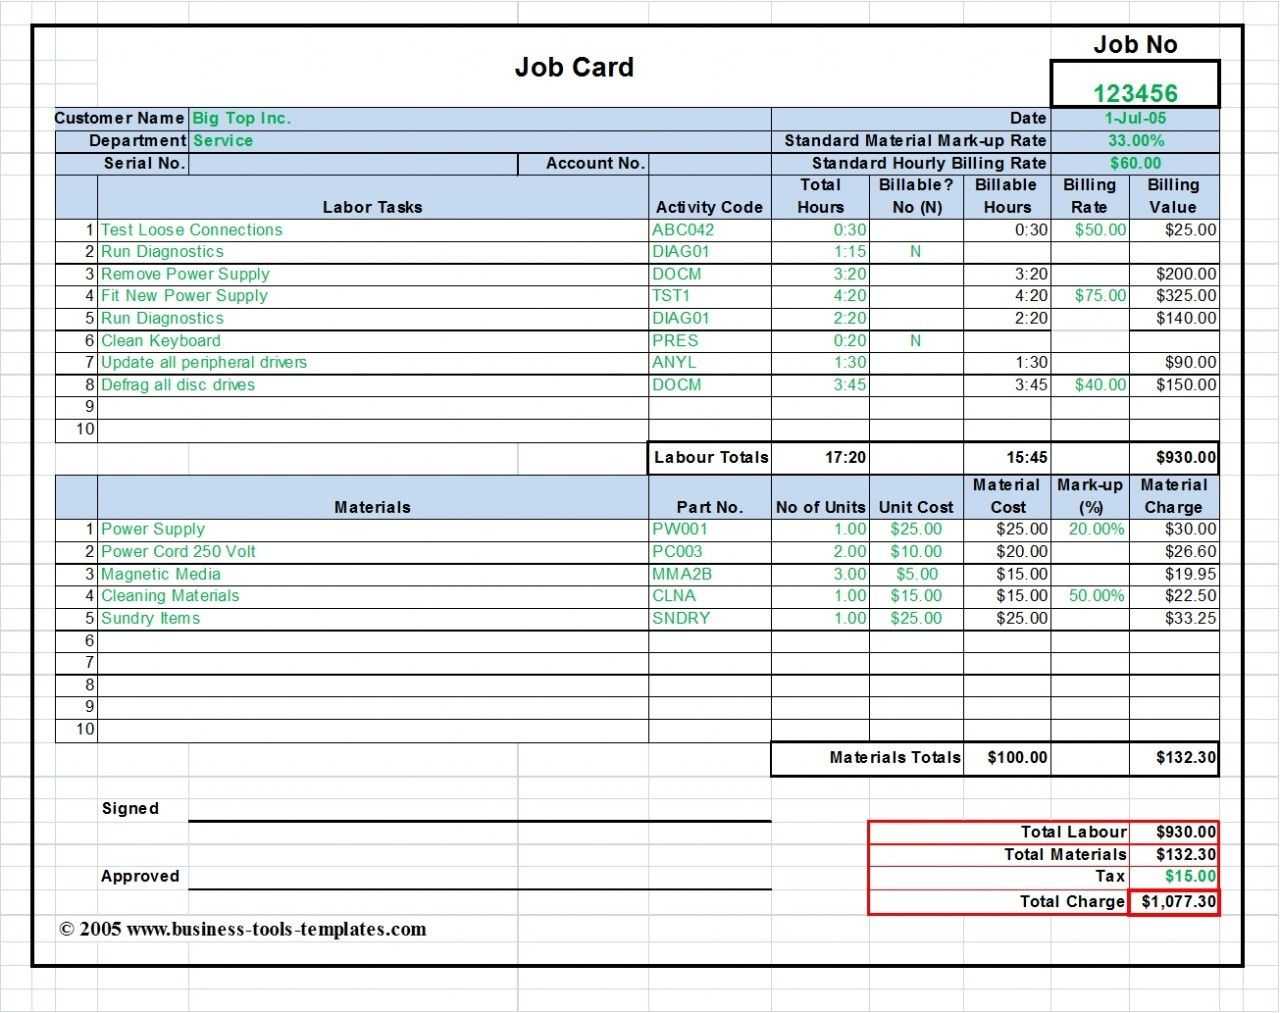 Workshop Job Card Template Excel, Labor & Material Cost Intended For Construction Cost Report Template